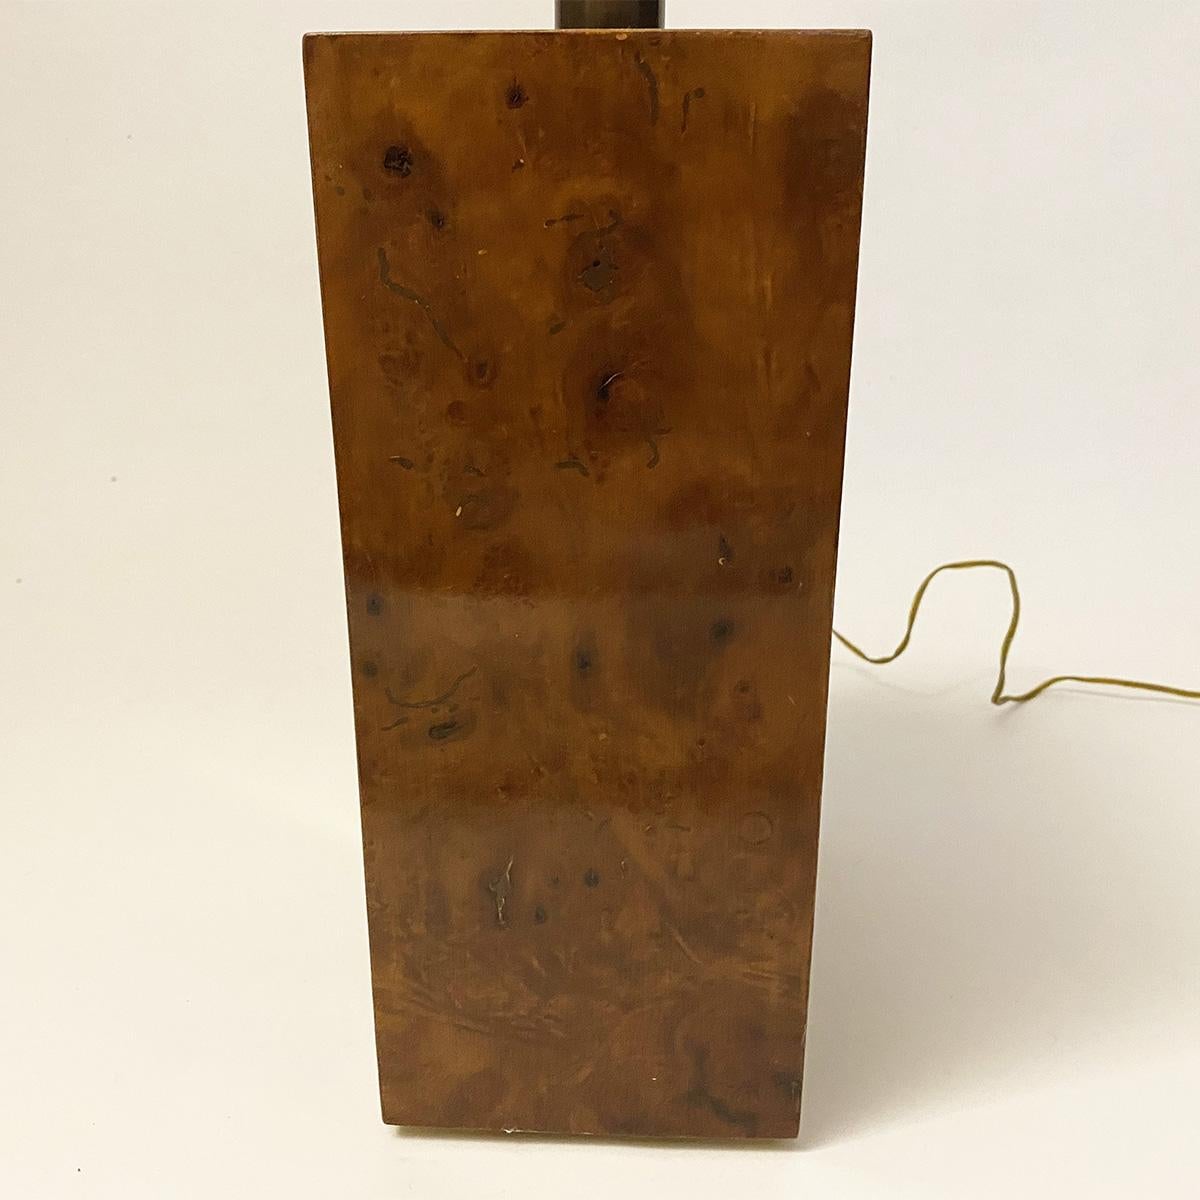 Modernist Lamp in Thuya Burl Wood and Brass, in the Style of Willy Rizzo, 1970s For Sale 2